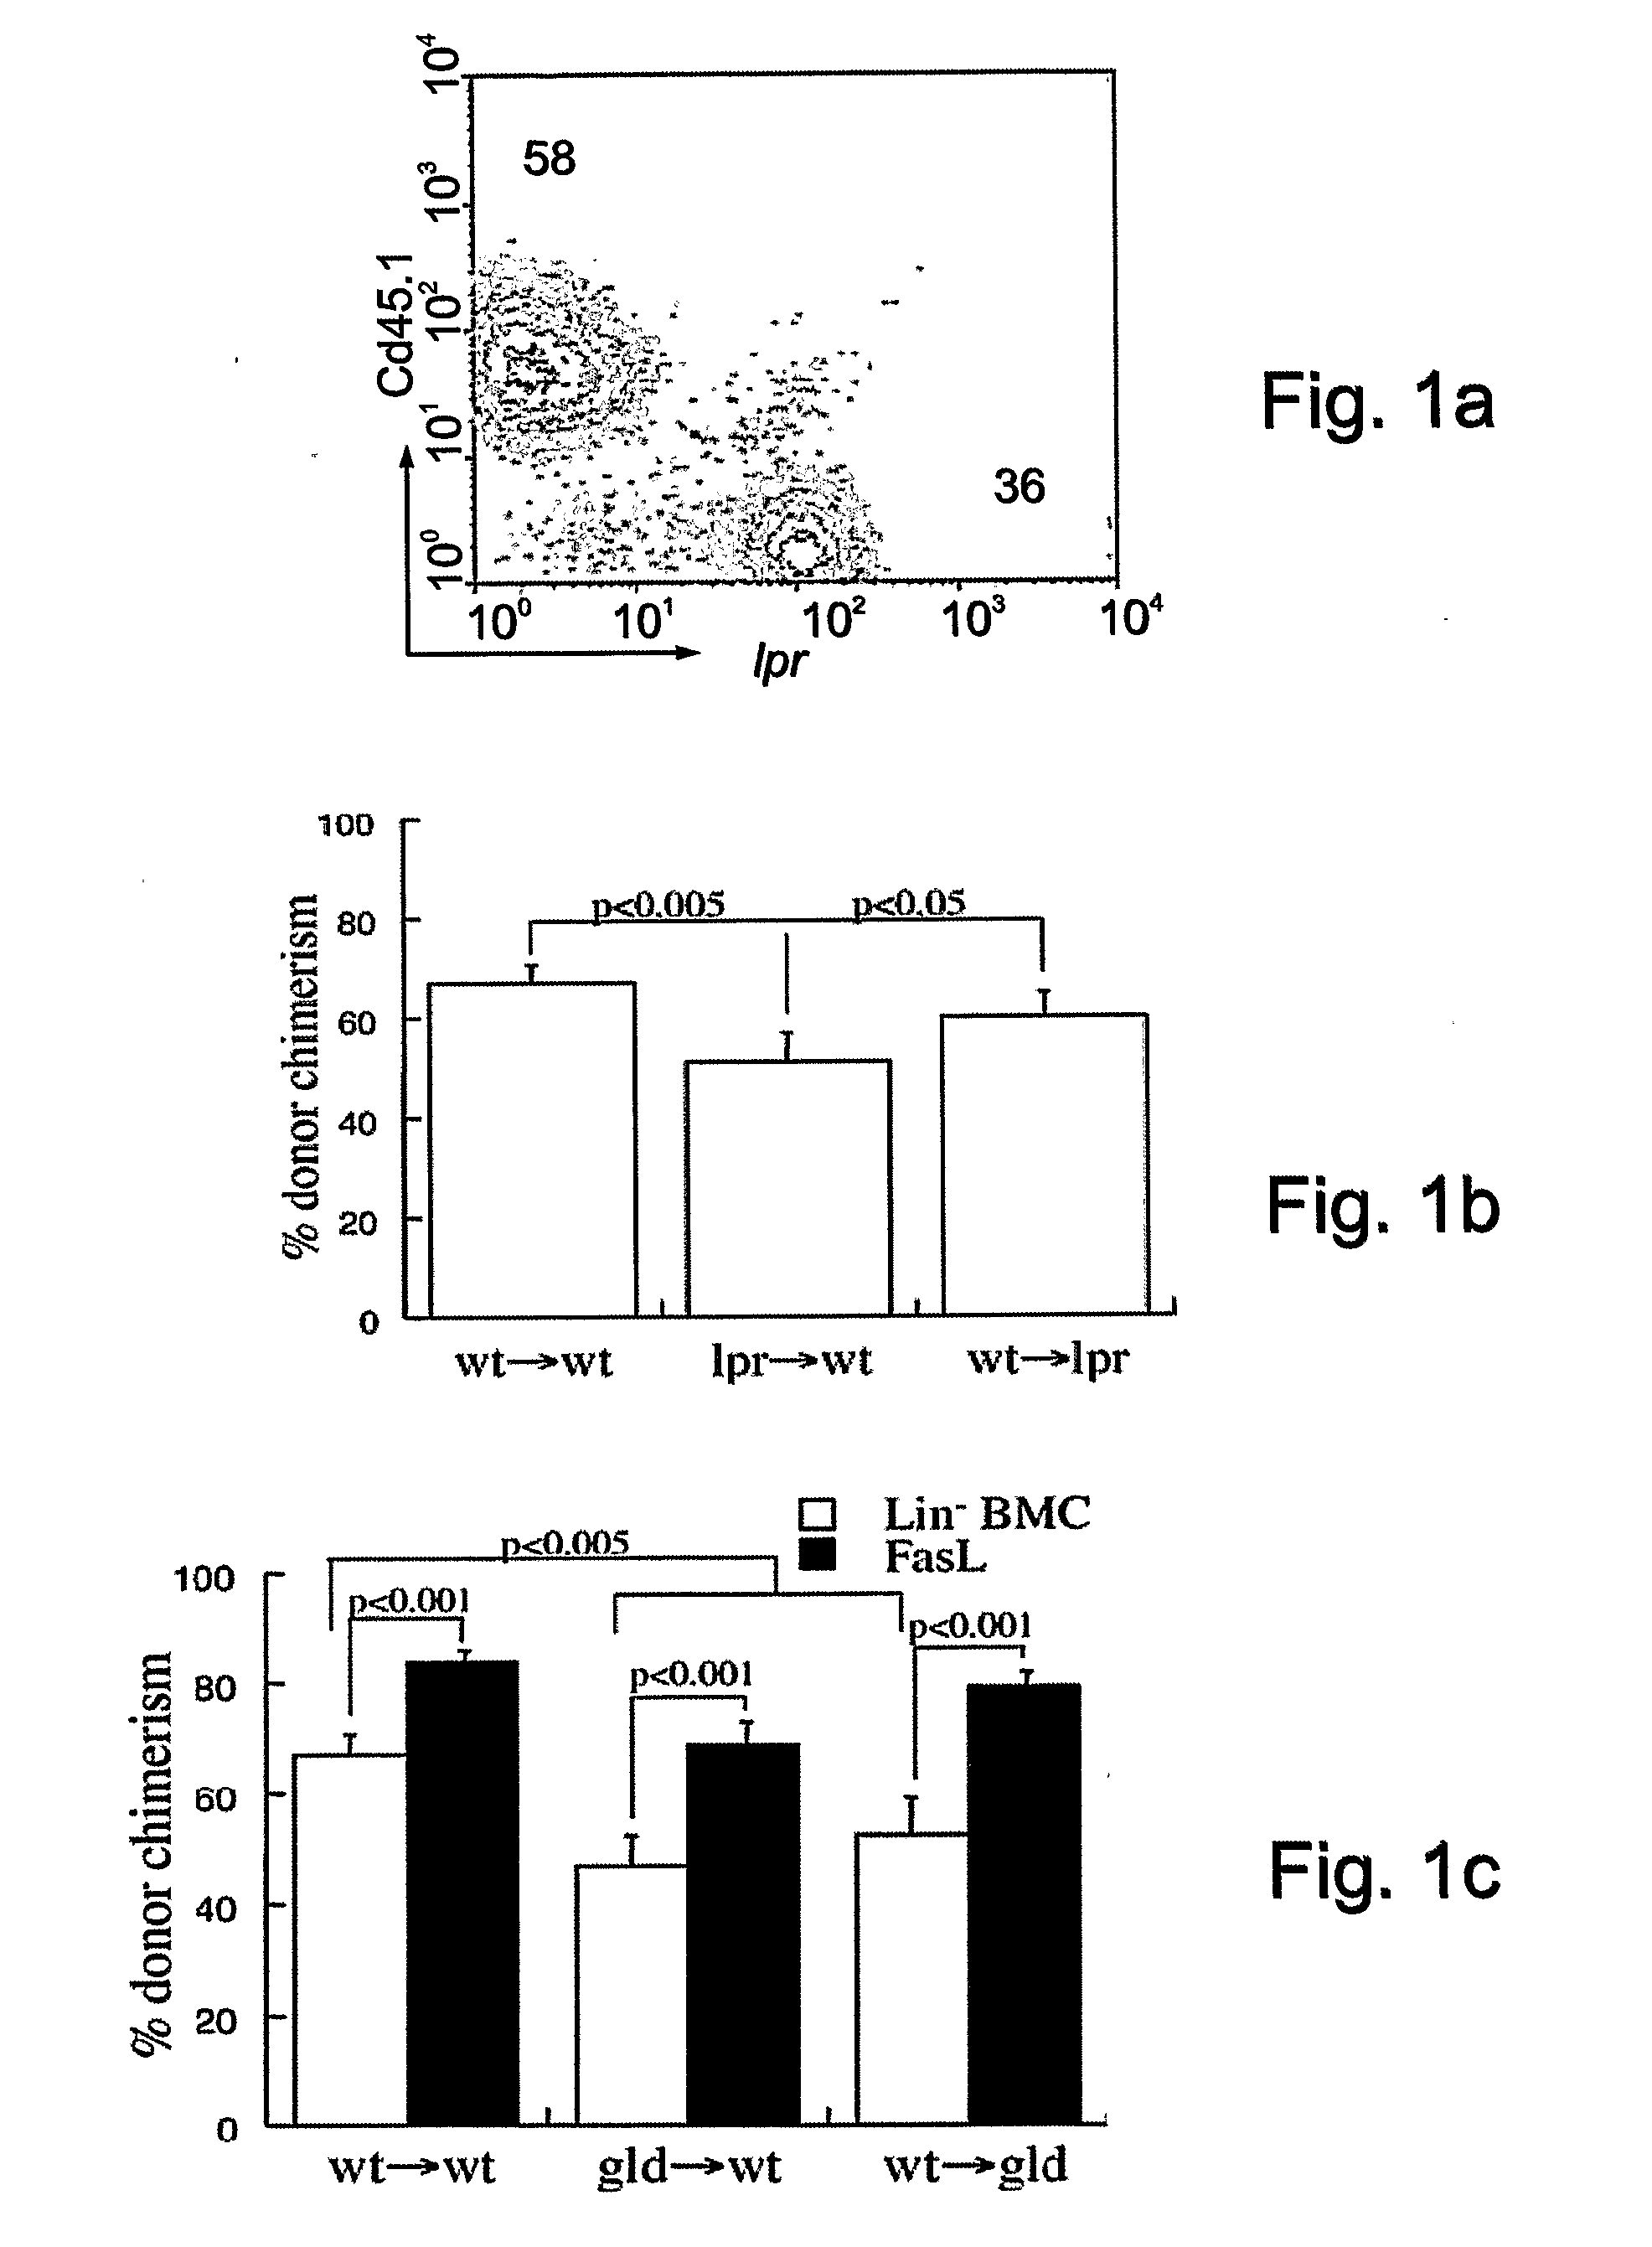 Methods of selecting stem cells and uses thereof